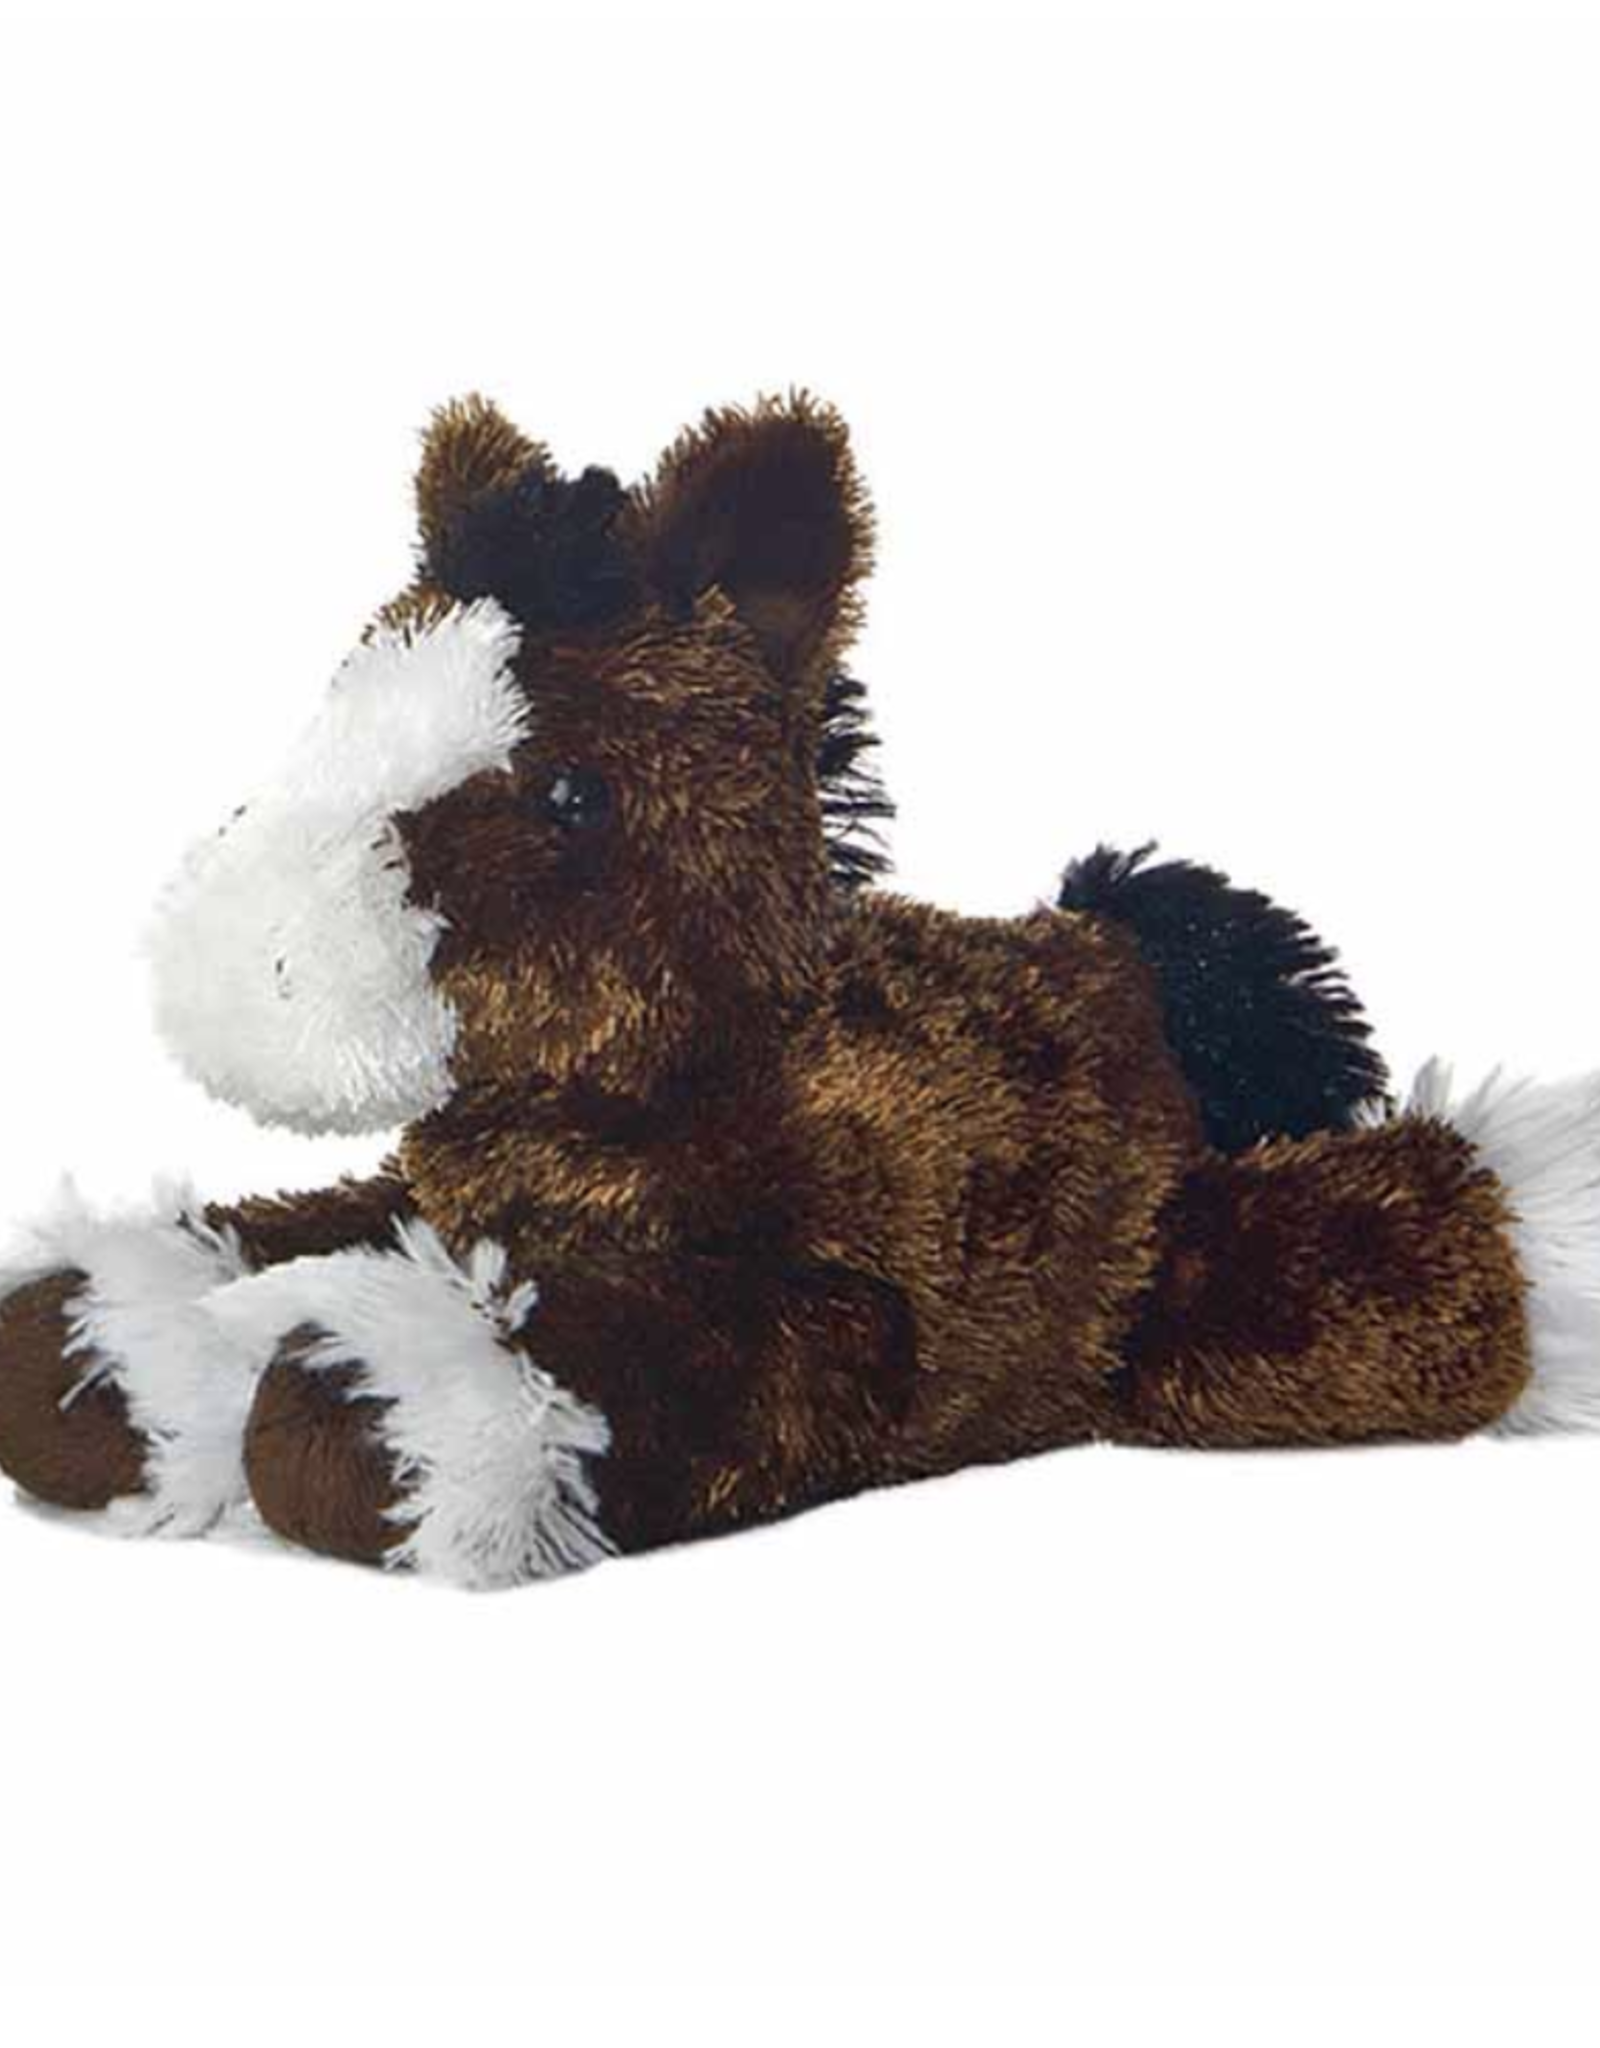 Clydesdale Plush Toy